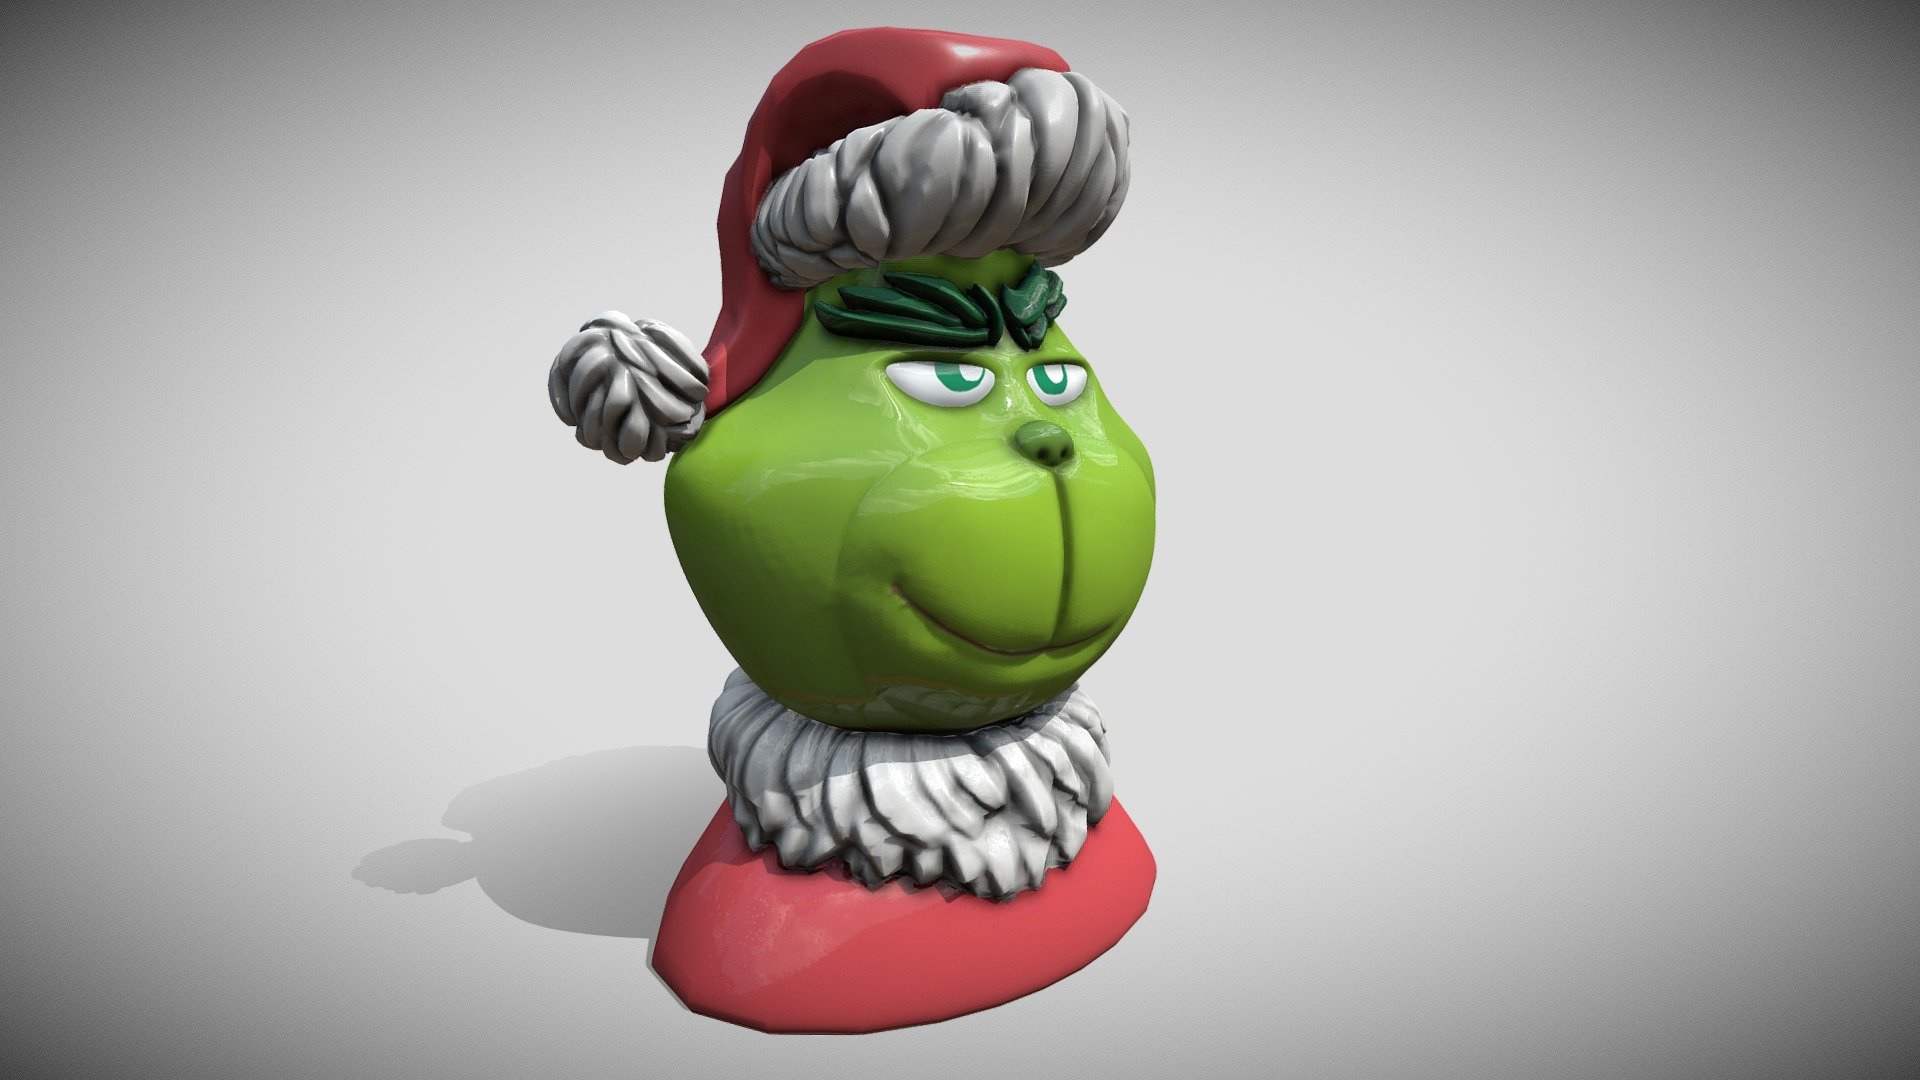 Grinch Cookie Canister